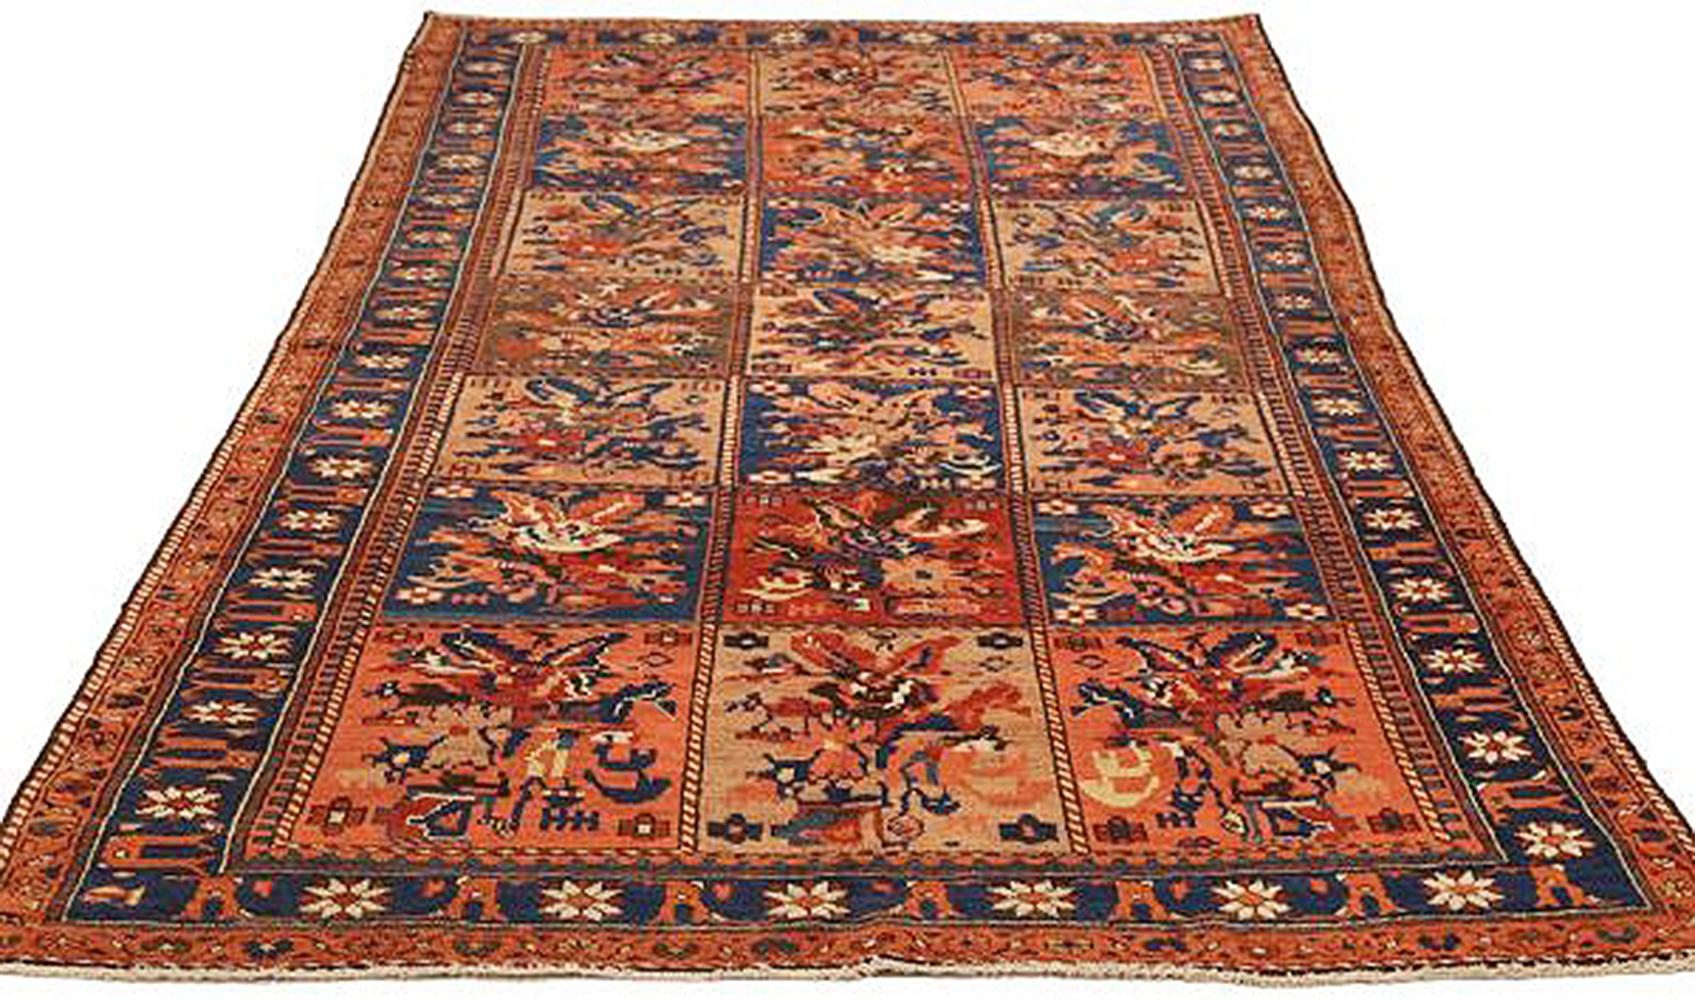 Antique Persian rug handwoven from the finest sheep’s wool and colored with all-natural vegetable dyes that are safe for humans and pets. It’s a traditional Bakhtiar design showing navy and red flower patterns over a beige field. It’s a beautiful